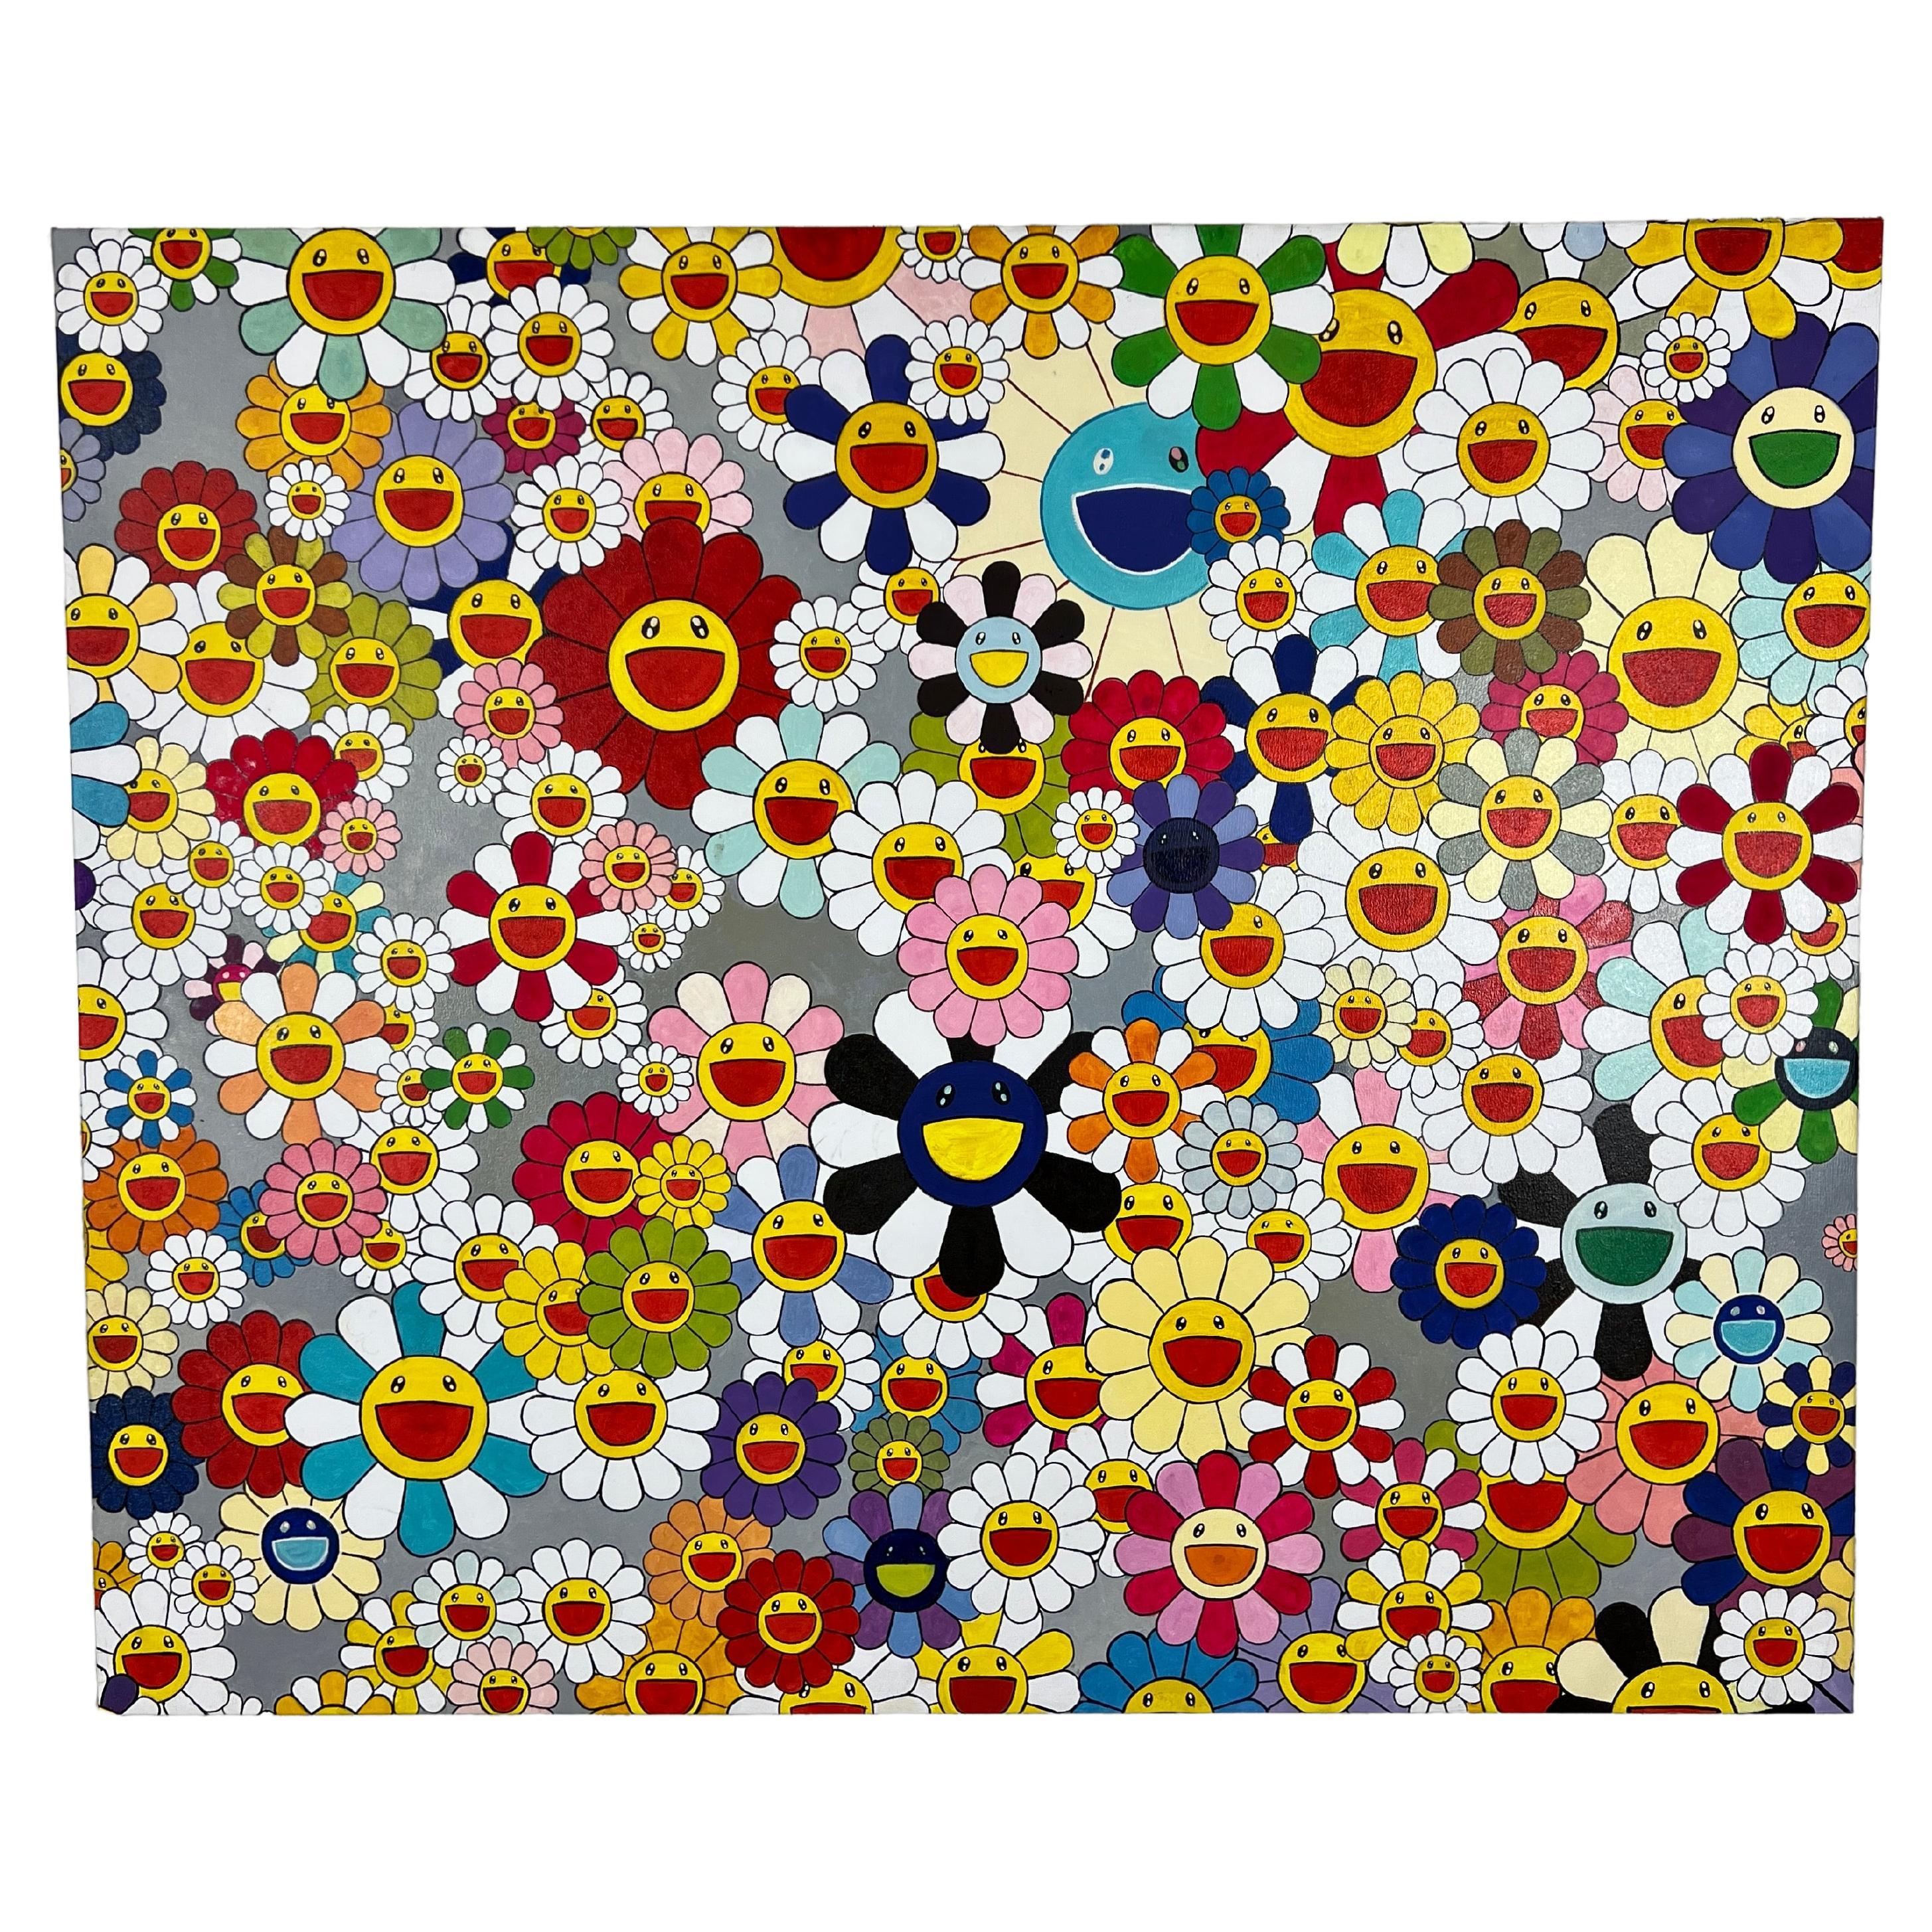 Oil on Canvas Painting in the style of Takashi Murakami